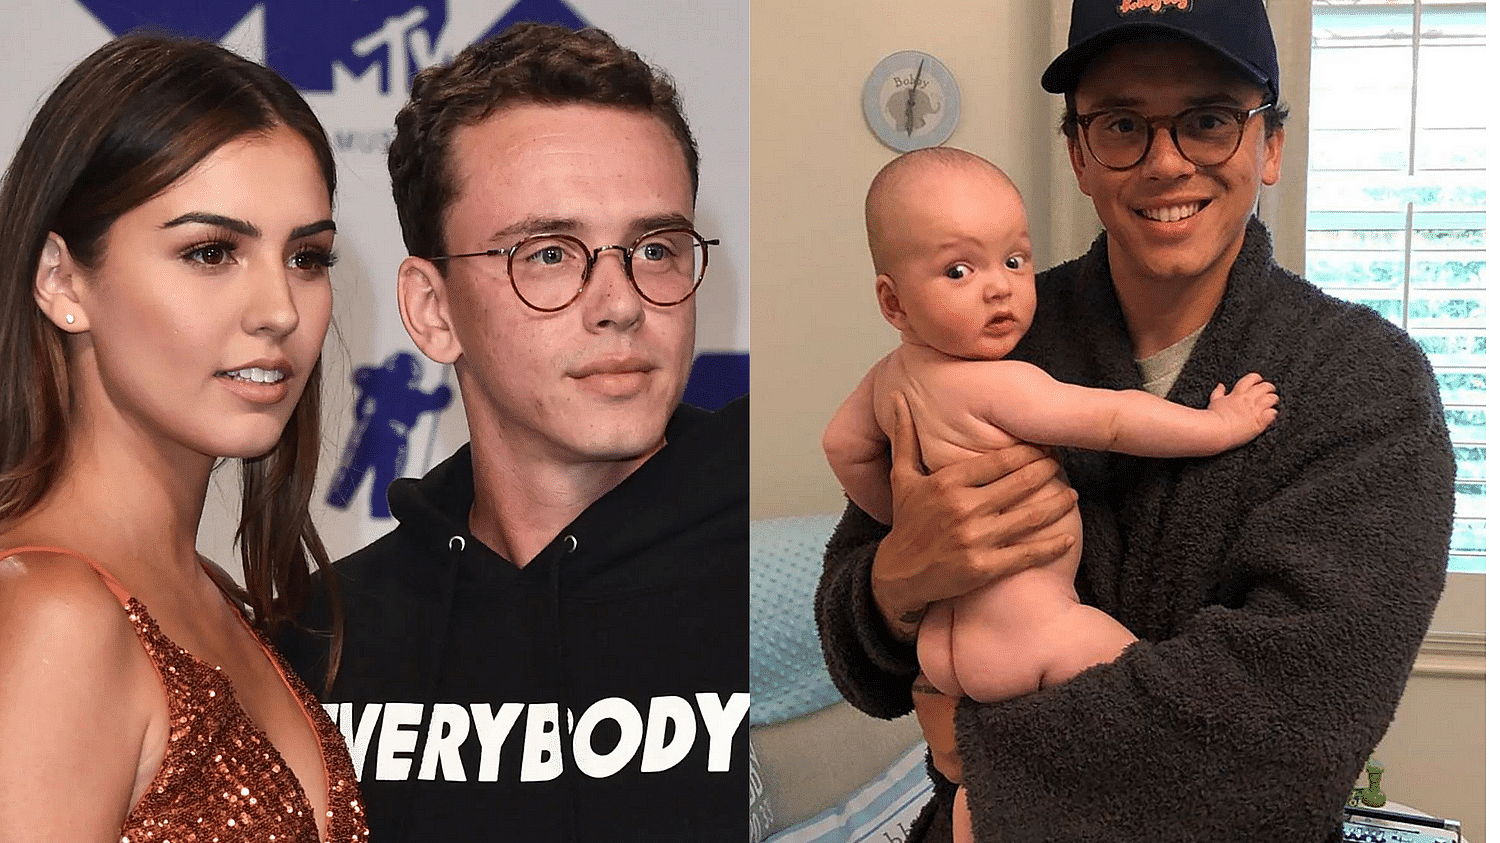 Logic with his wife and child